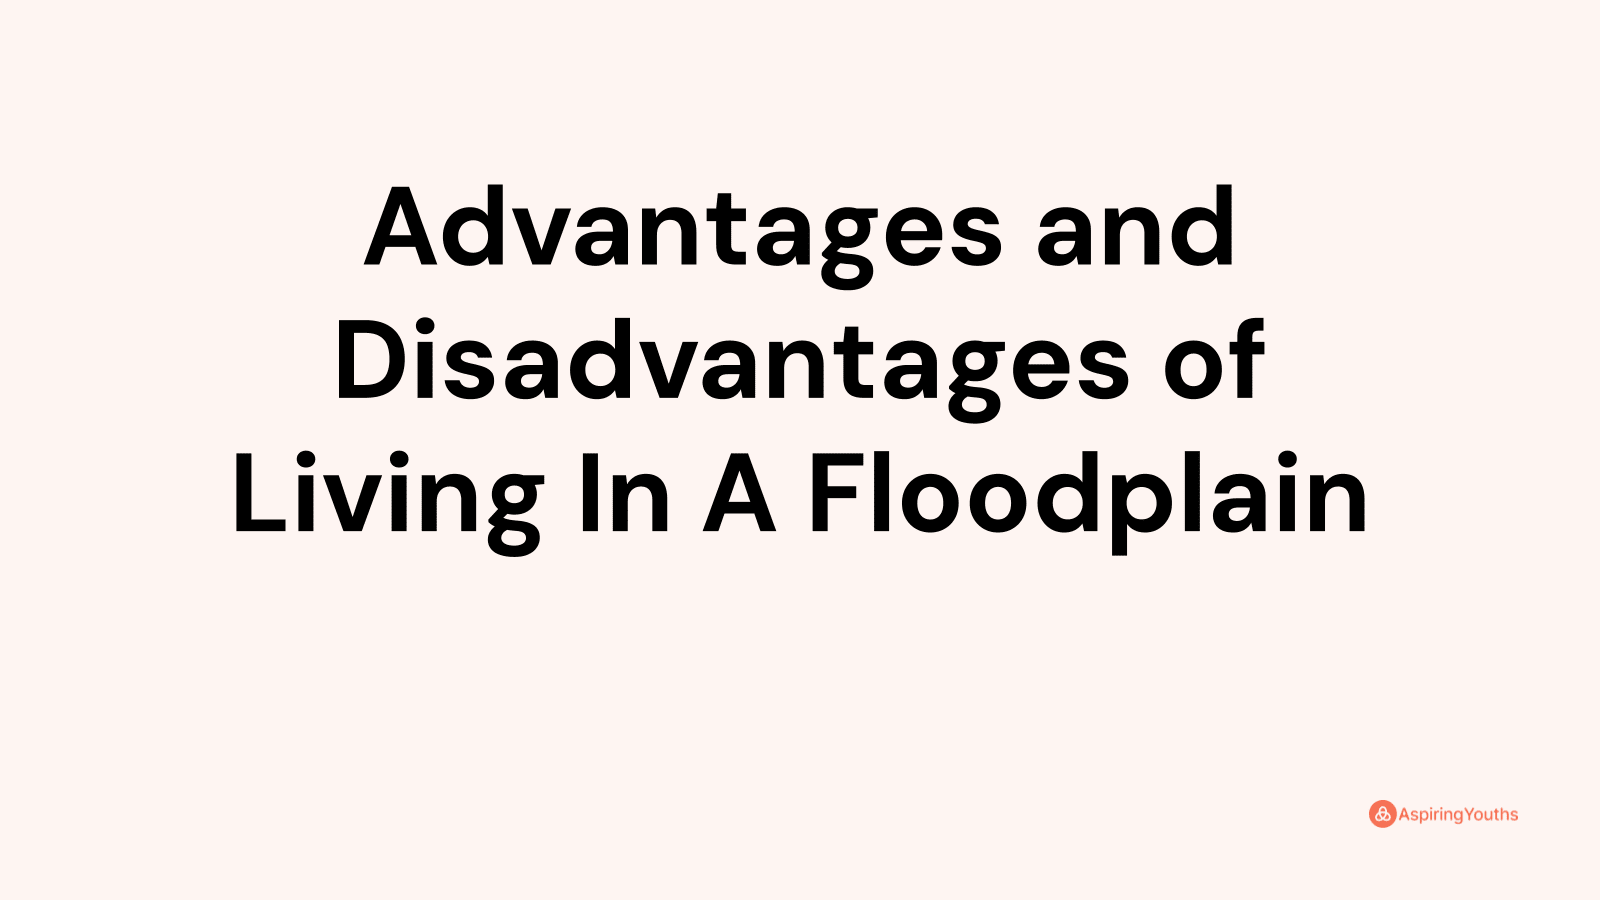 Advantages and disadvantages of Living In A Floodplain